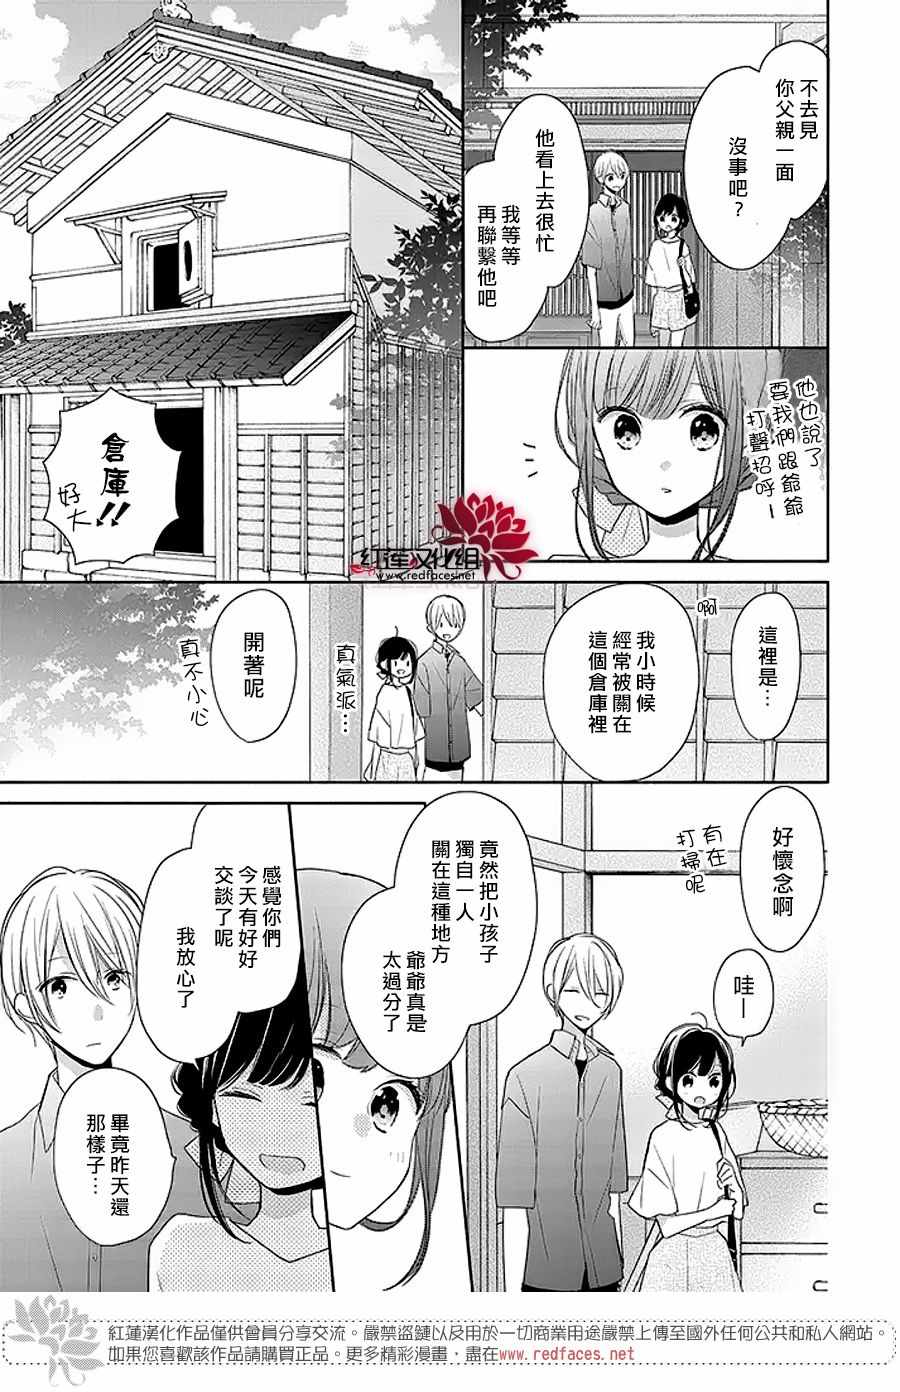 《If given a second chance》漫画 second chance 013话